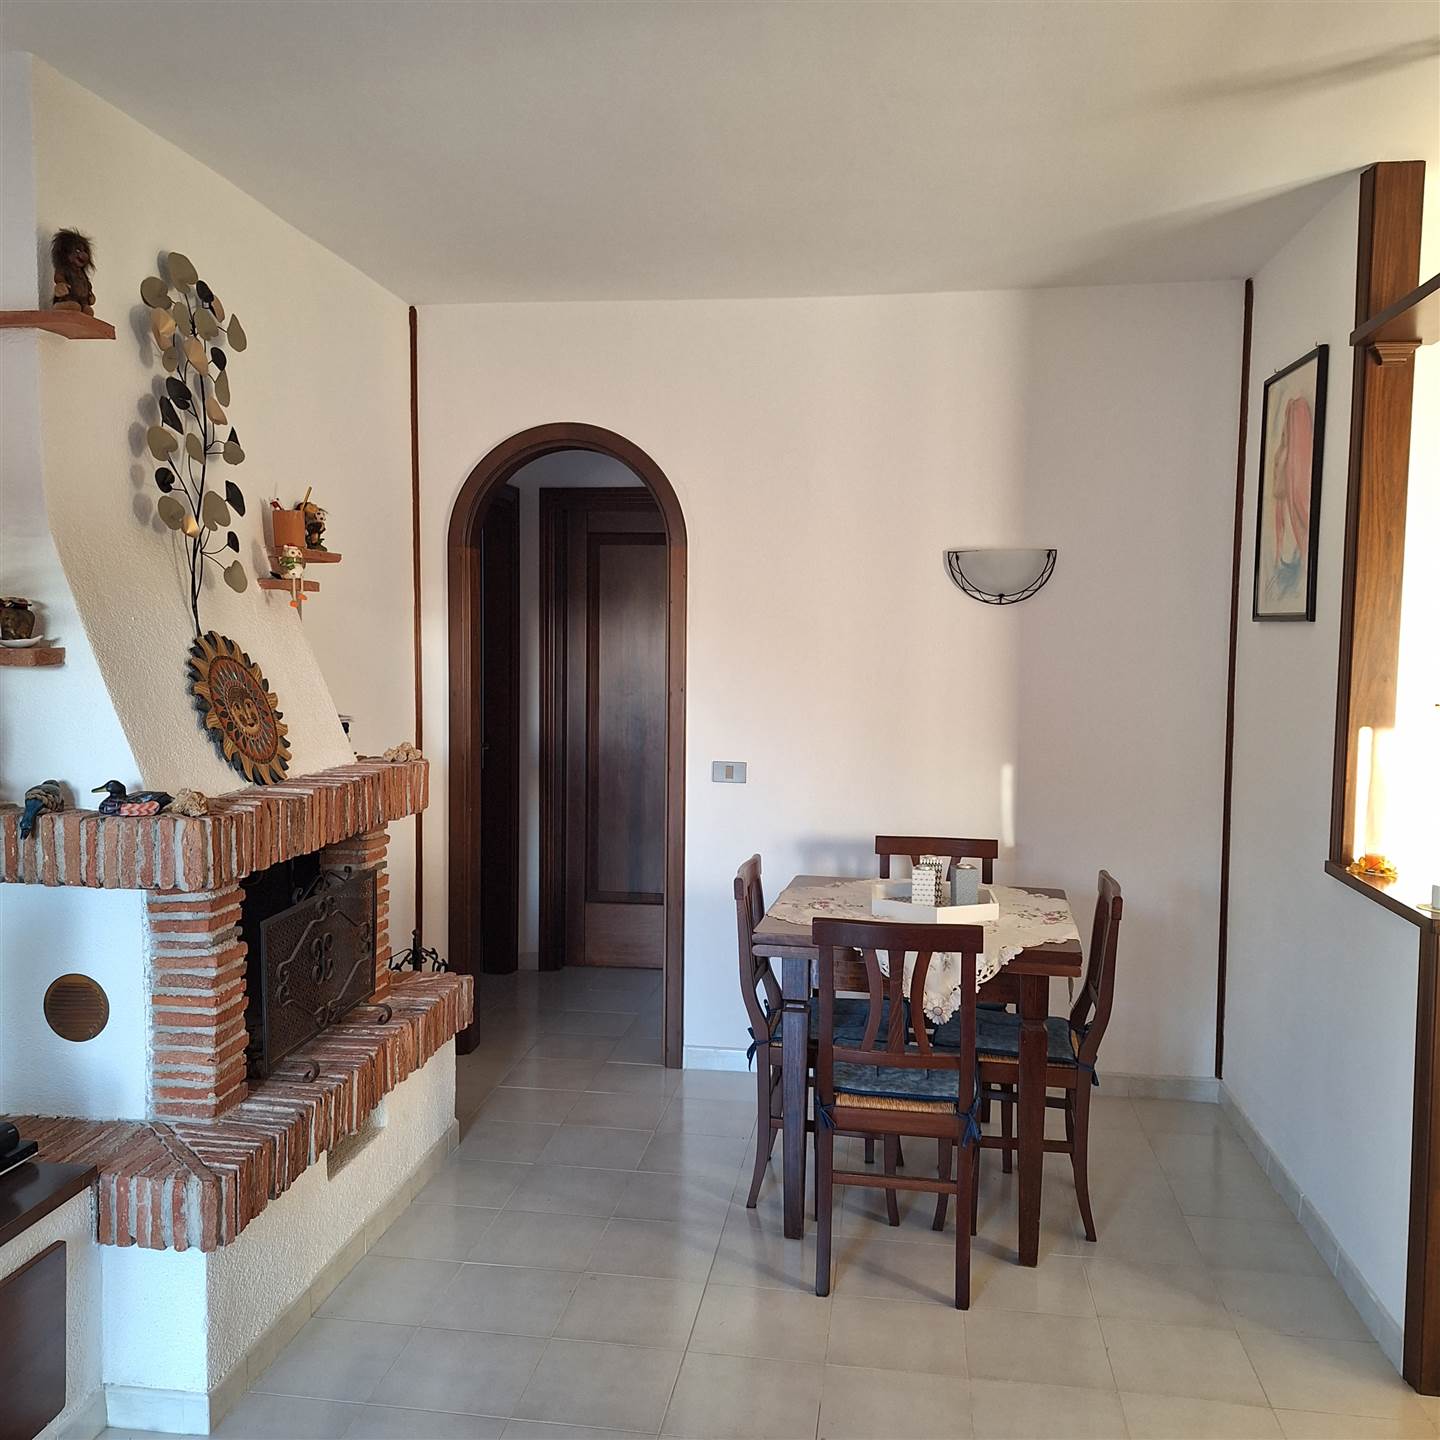 BRACCAGNI, GROSSETO, Apartment for sale of 88 Sq. mt., Excellent Condition, Heating Individual heating system, Energetic class: G, Epi: 129,5 kwh/m2 